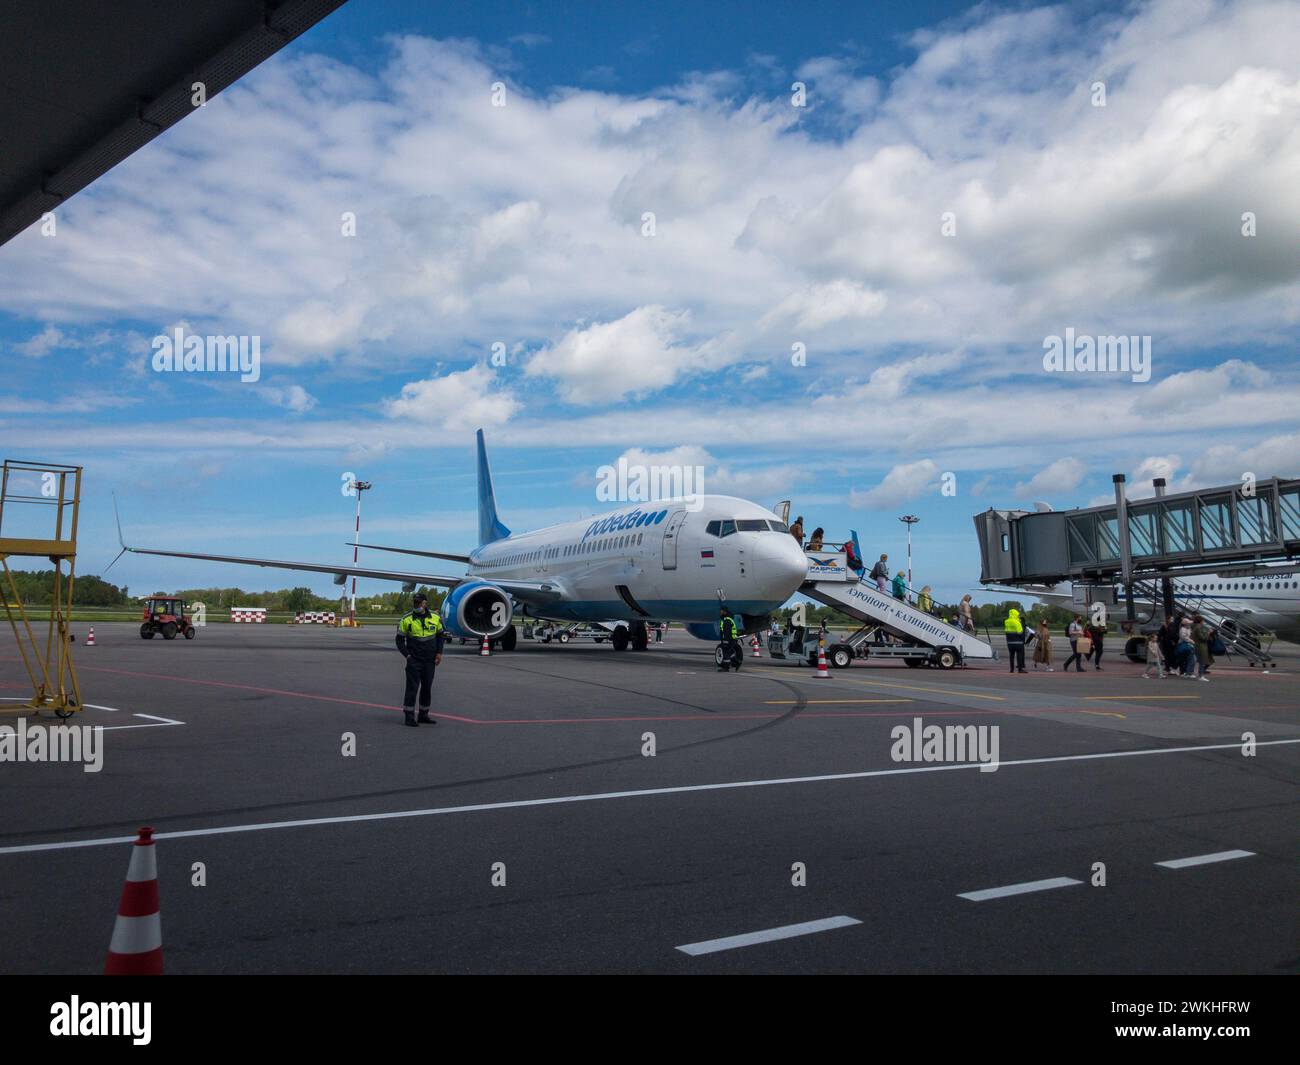 Kaliningrad, Russia - October 12, 2023: Travelers ascending stairs to board an airplane on tarmac with clear skies and airport crew in attendance. Stock Photo